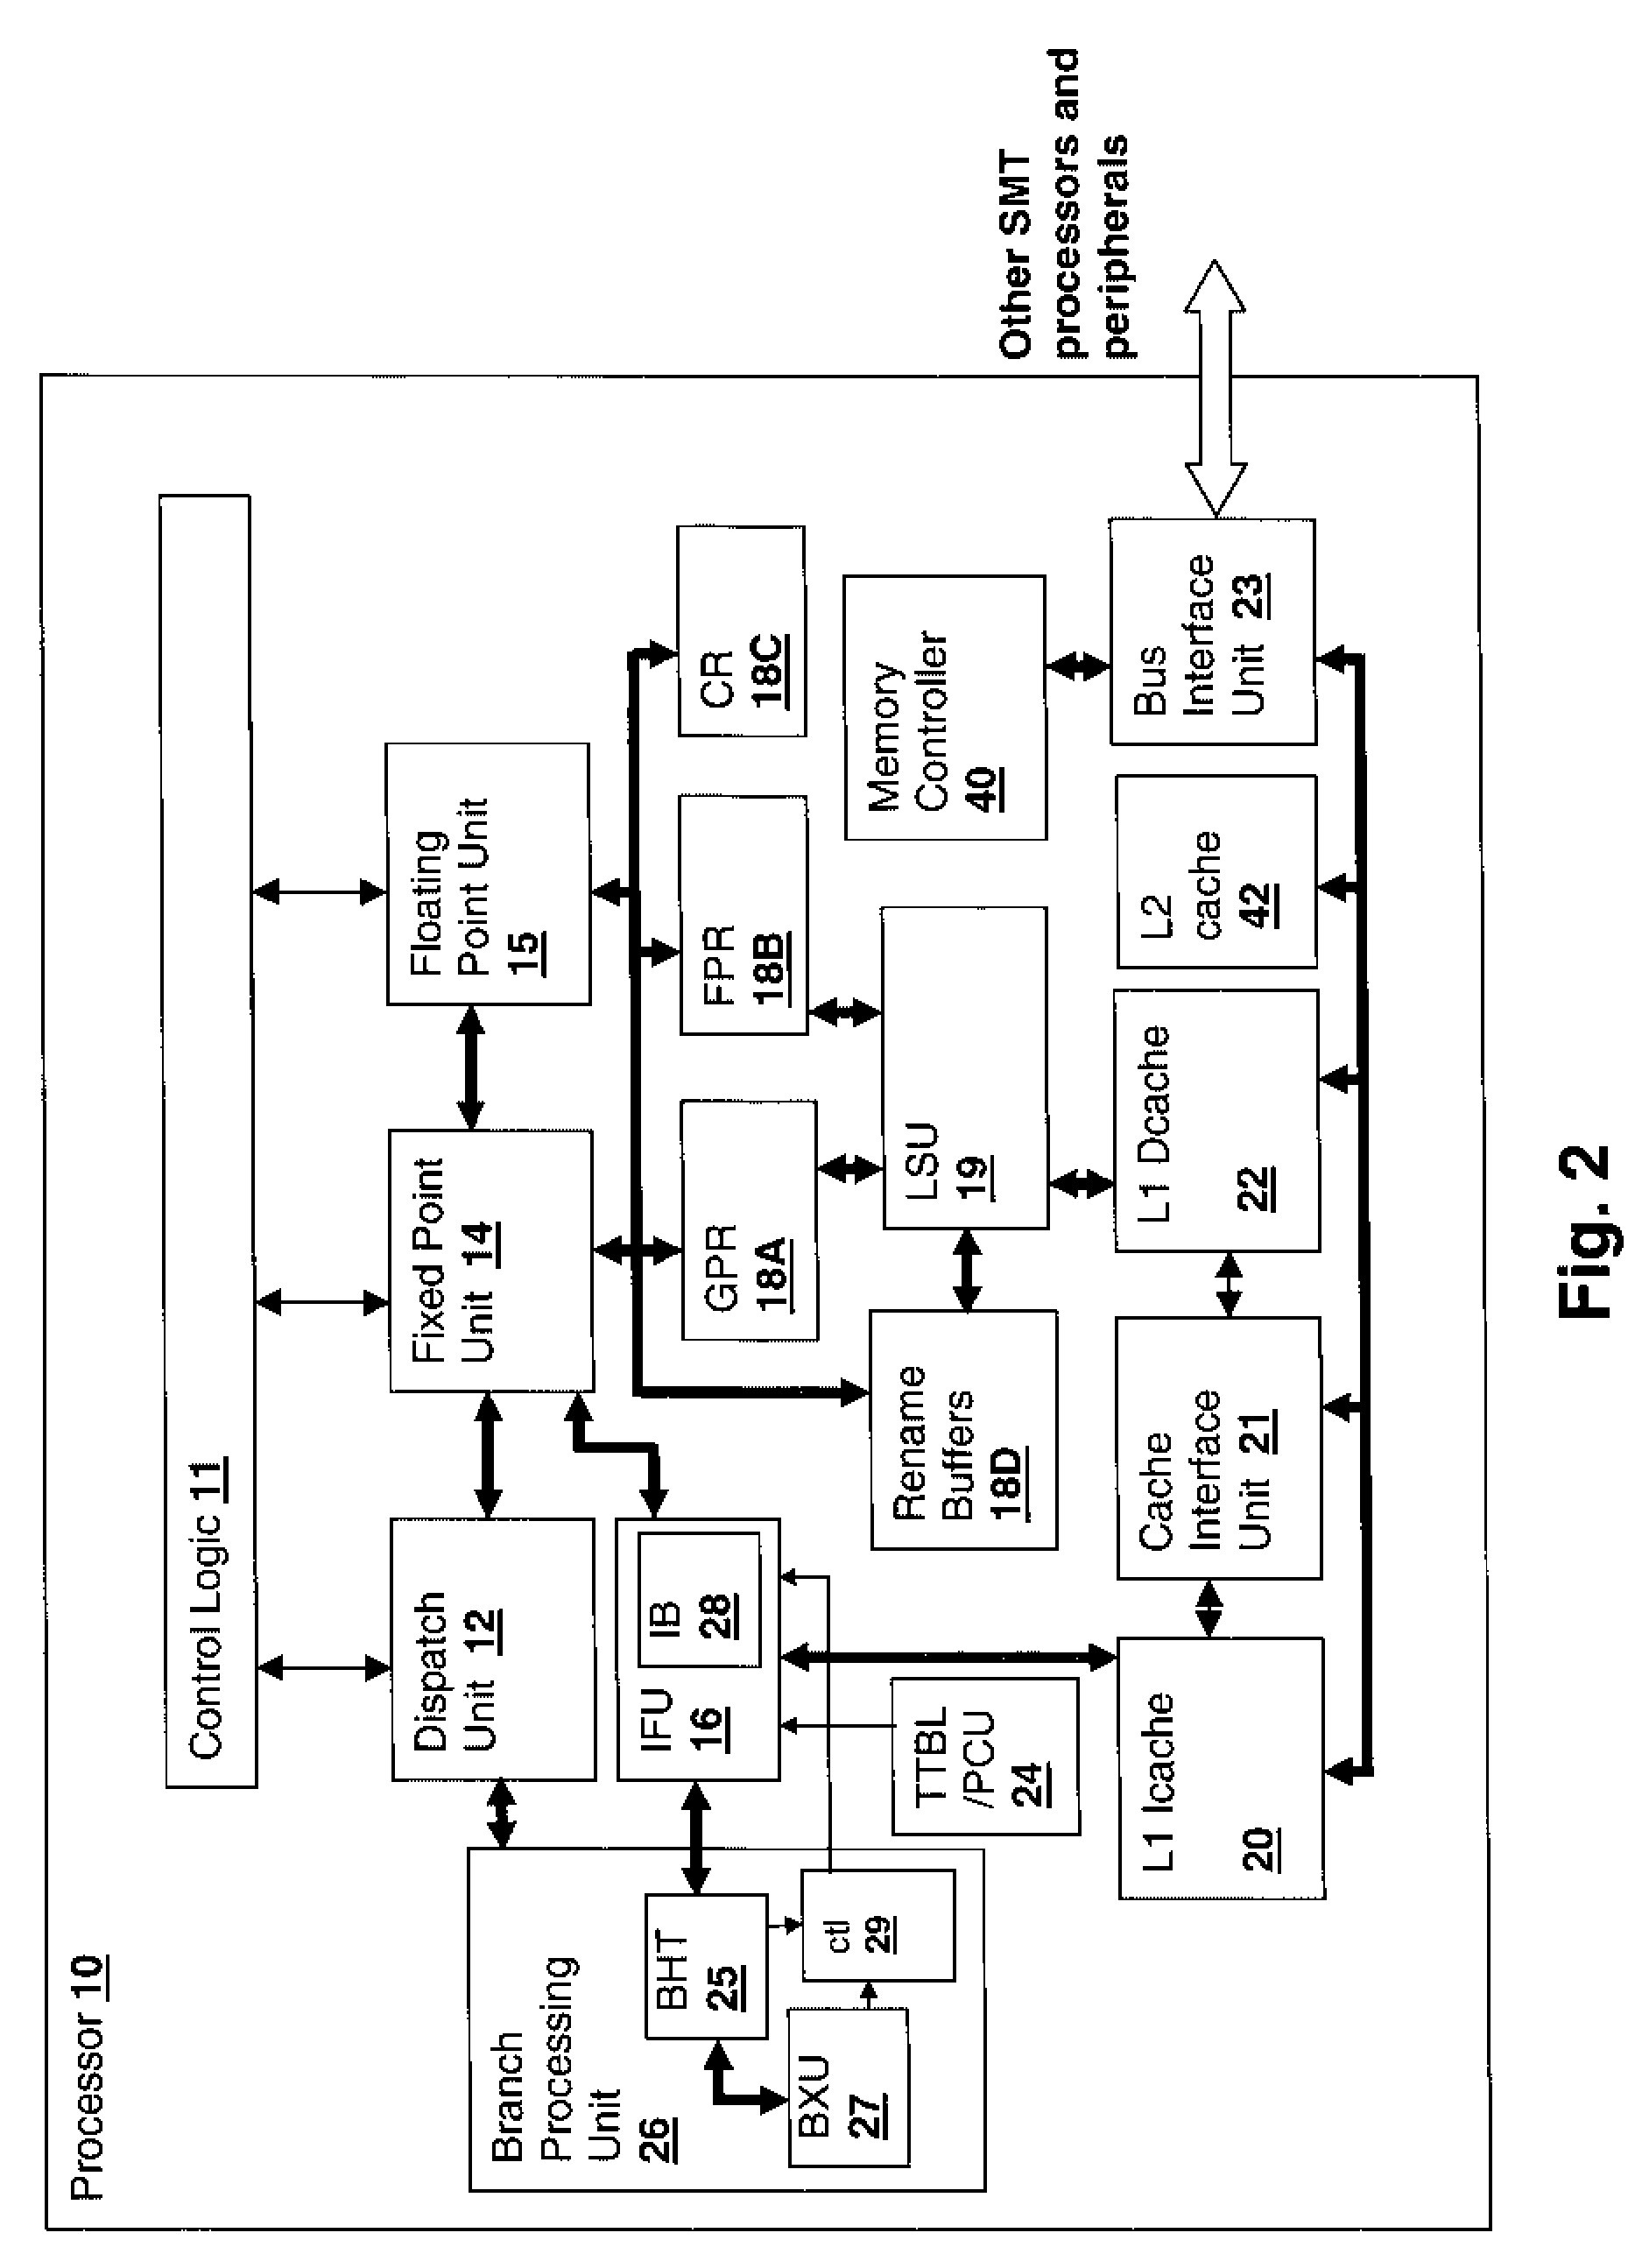 Method and apparatus for dynamically managing instruction buffer depths for non-predicted branches